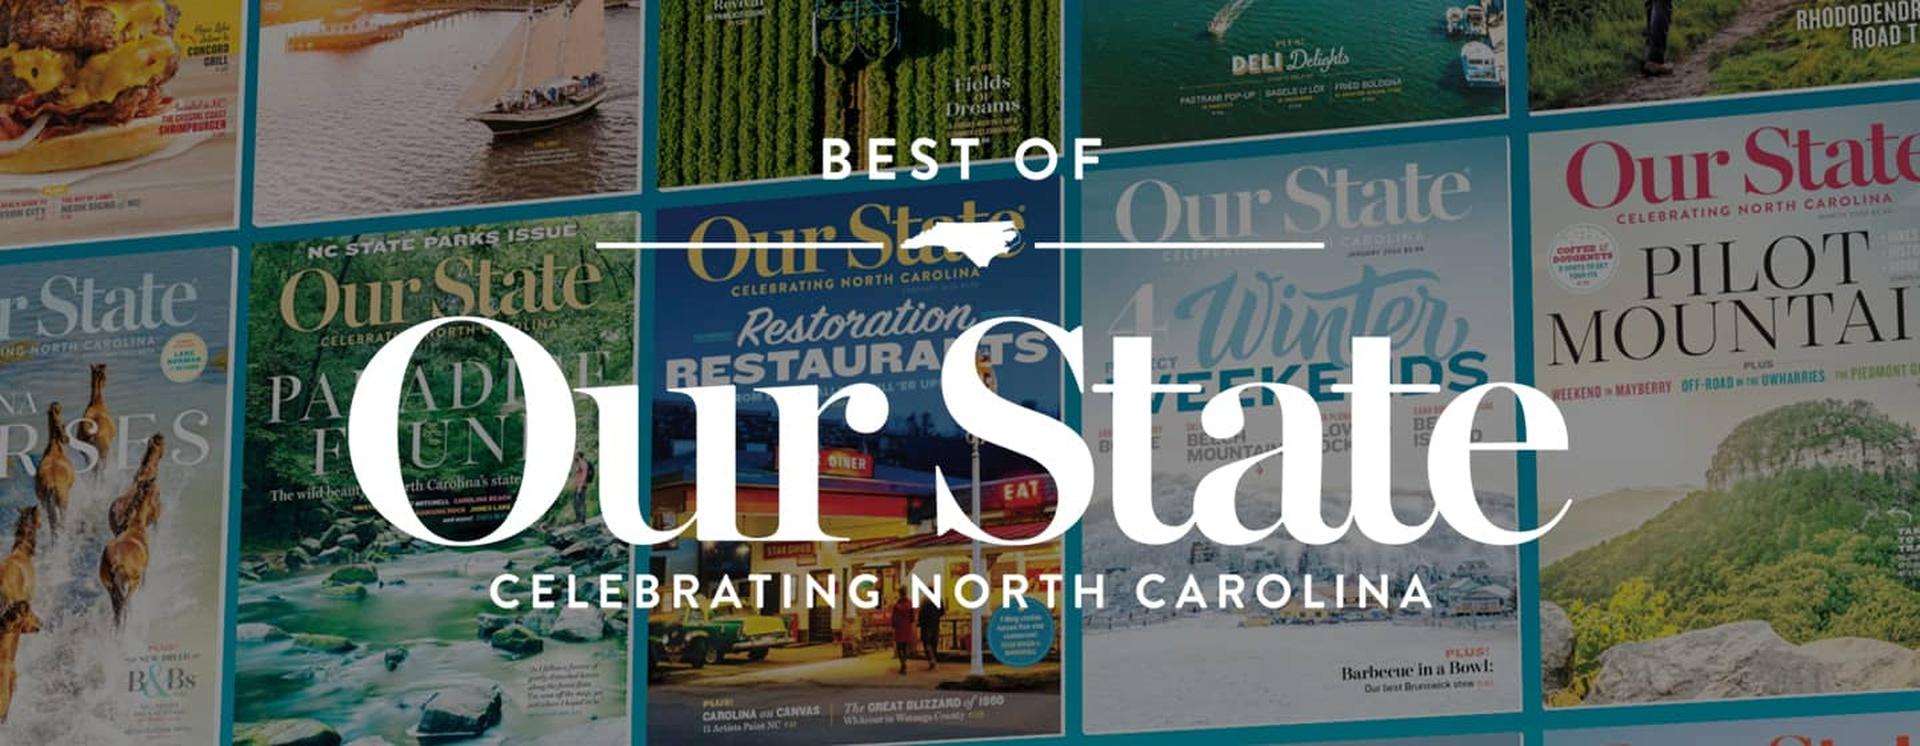 PBS North Carolina to Premiere Season Two of 'Best of Our State' on